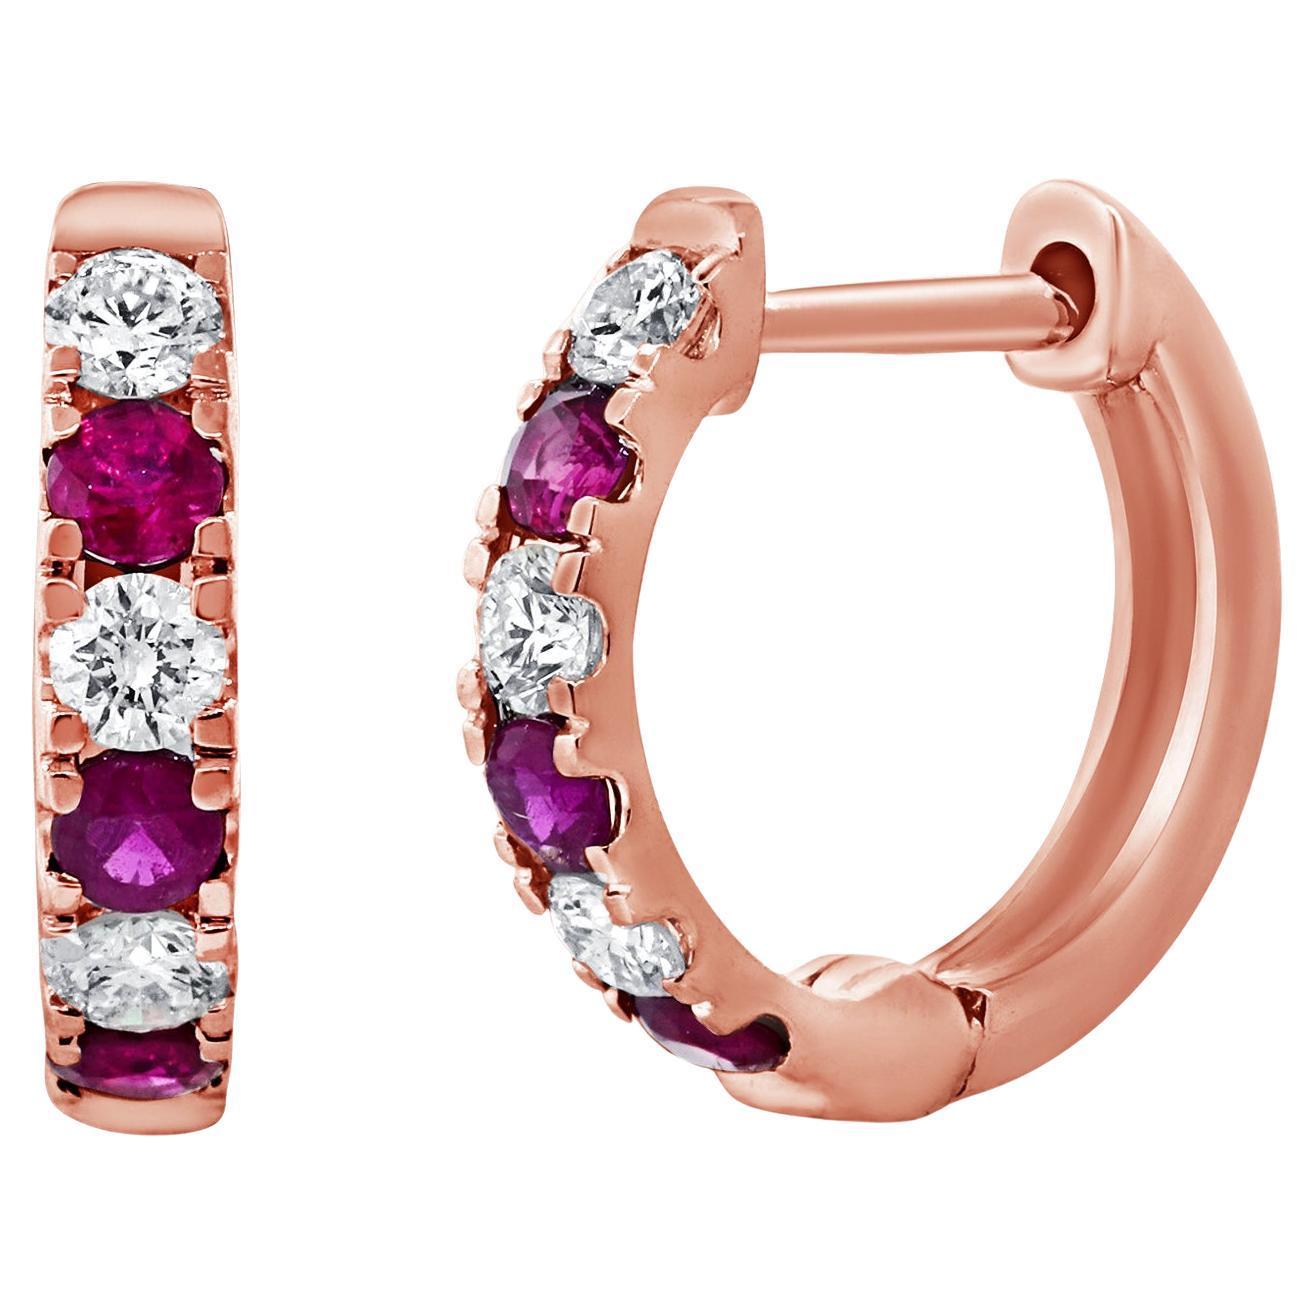 14K GOLD RUBY & DIAMOND ALTERNATING HUGGIE EARRING

          - Diamond Weight: 0.25 ct.
          - Ruby Weight: 0.31 ct.
          - Gold Weight: 1.90 grams ( approx.)
          - Earring Length: 0.50 inches

This piece is perfect for everyday